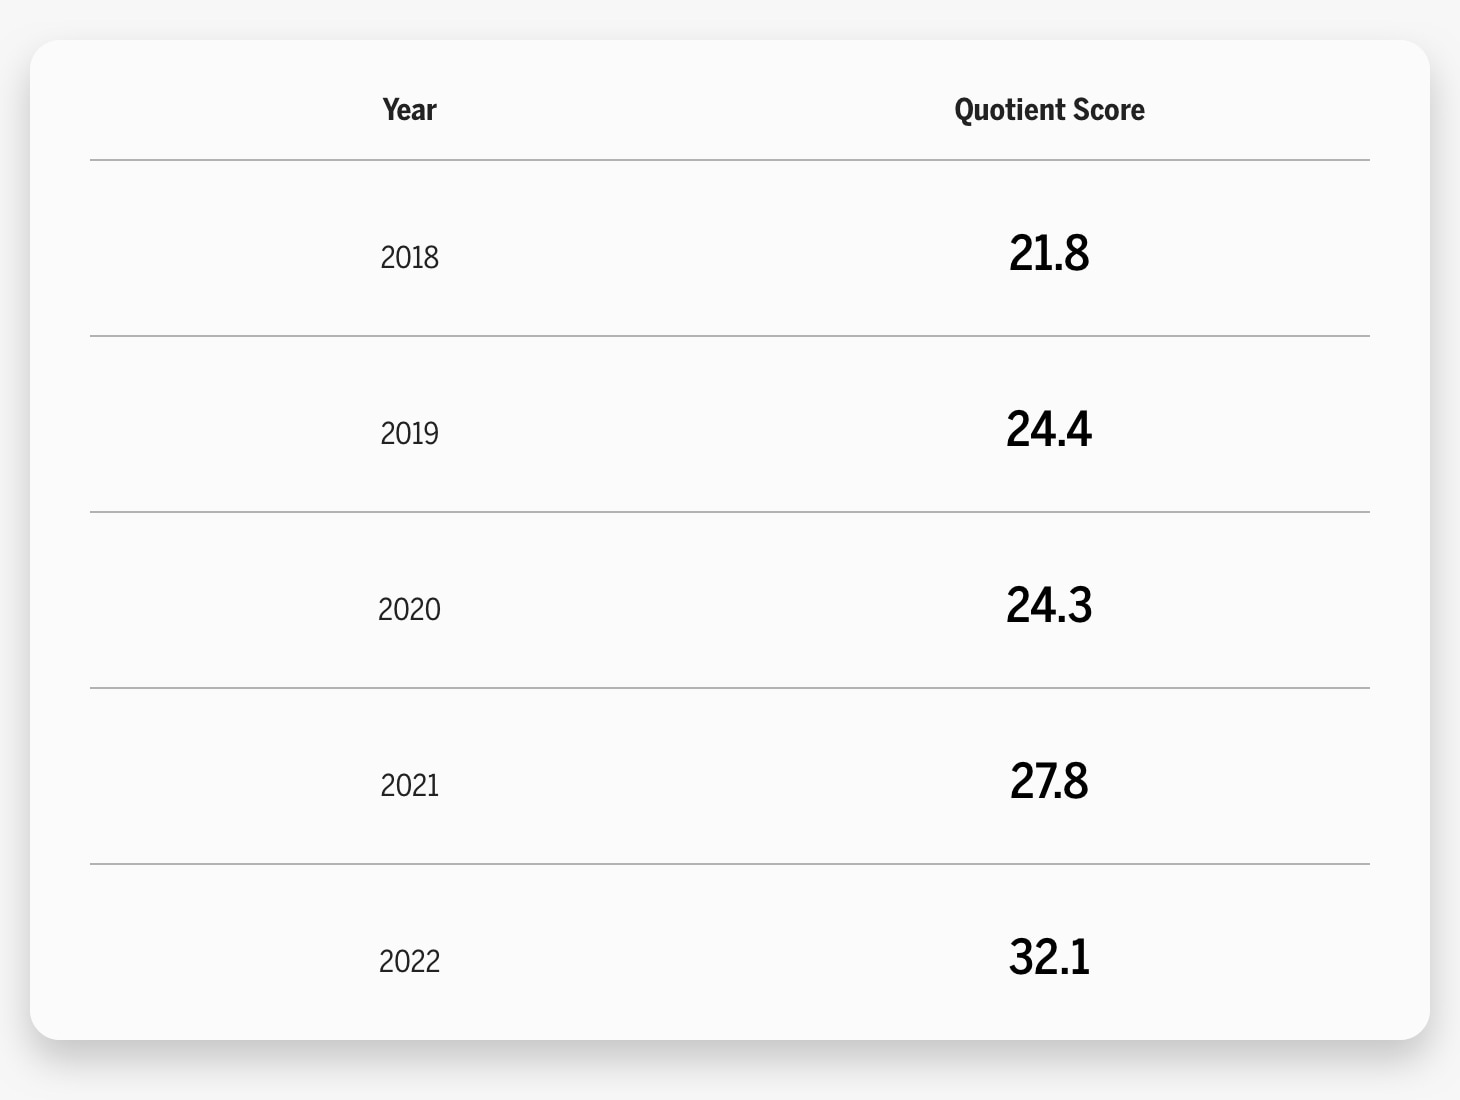 Quotient Scores over years 2018 to 2022 chart